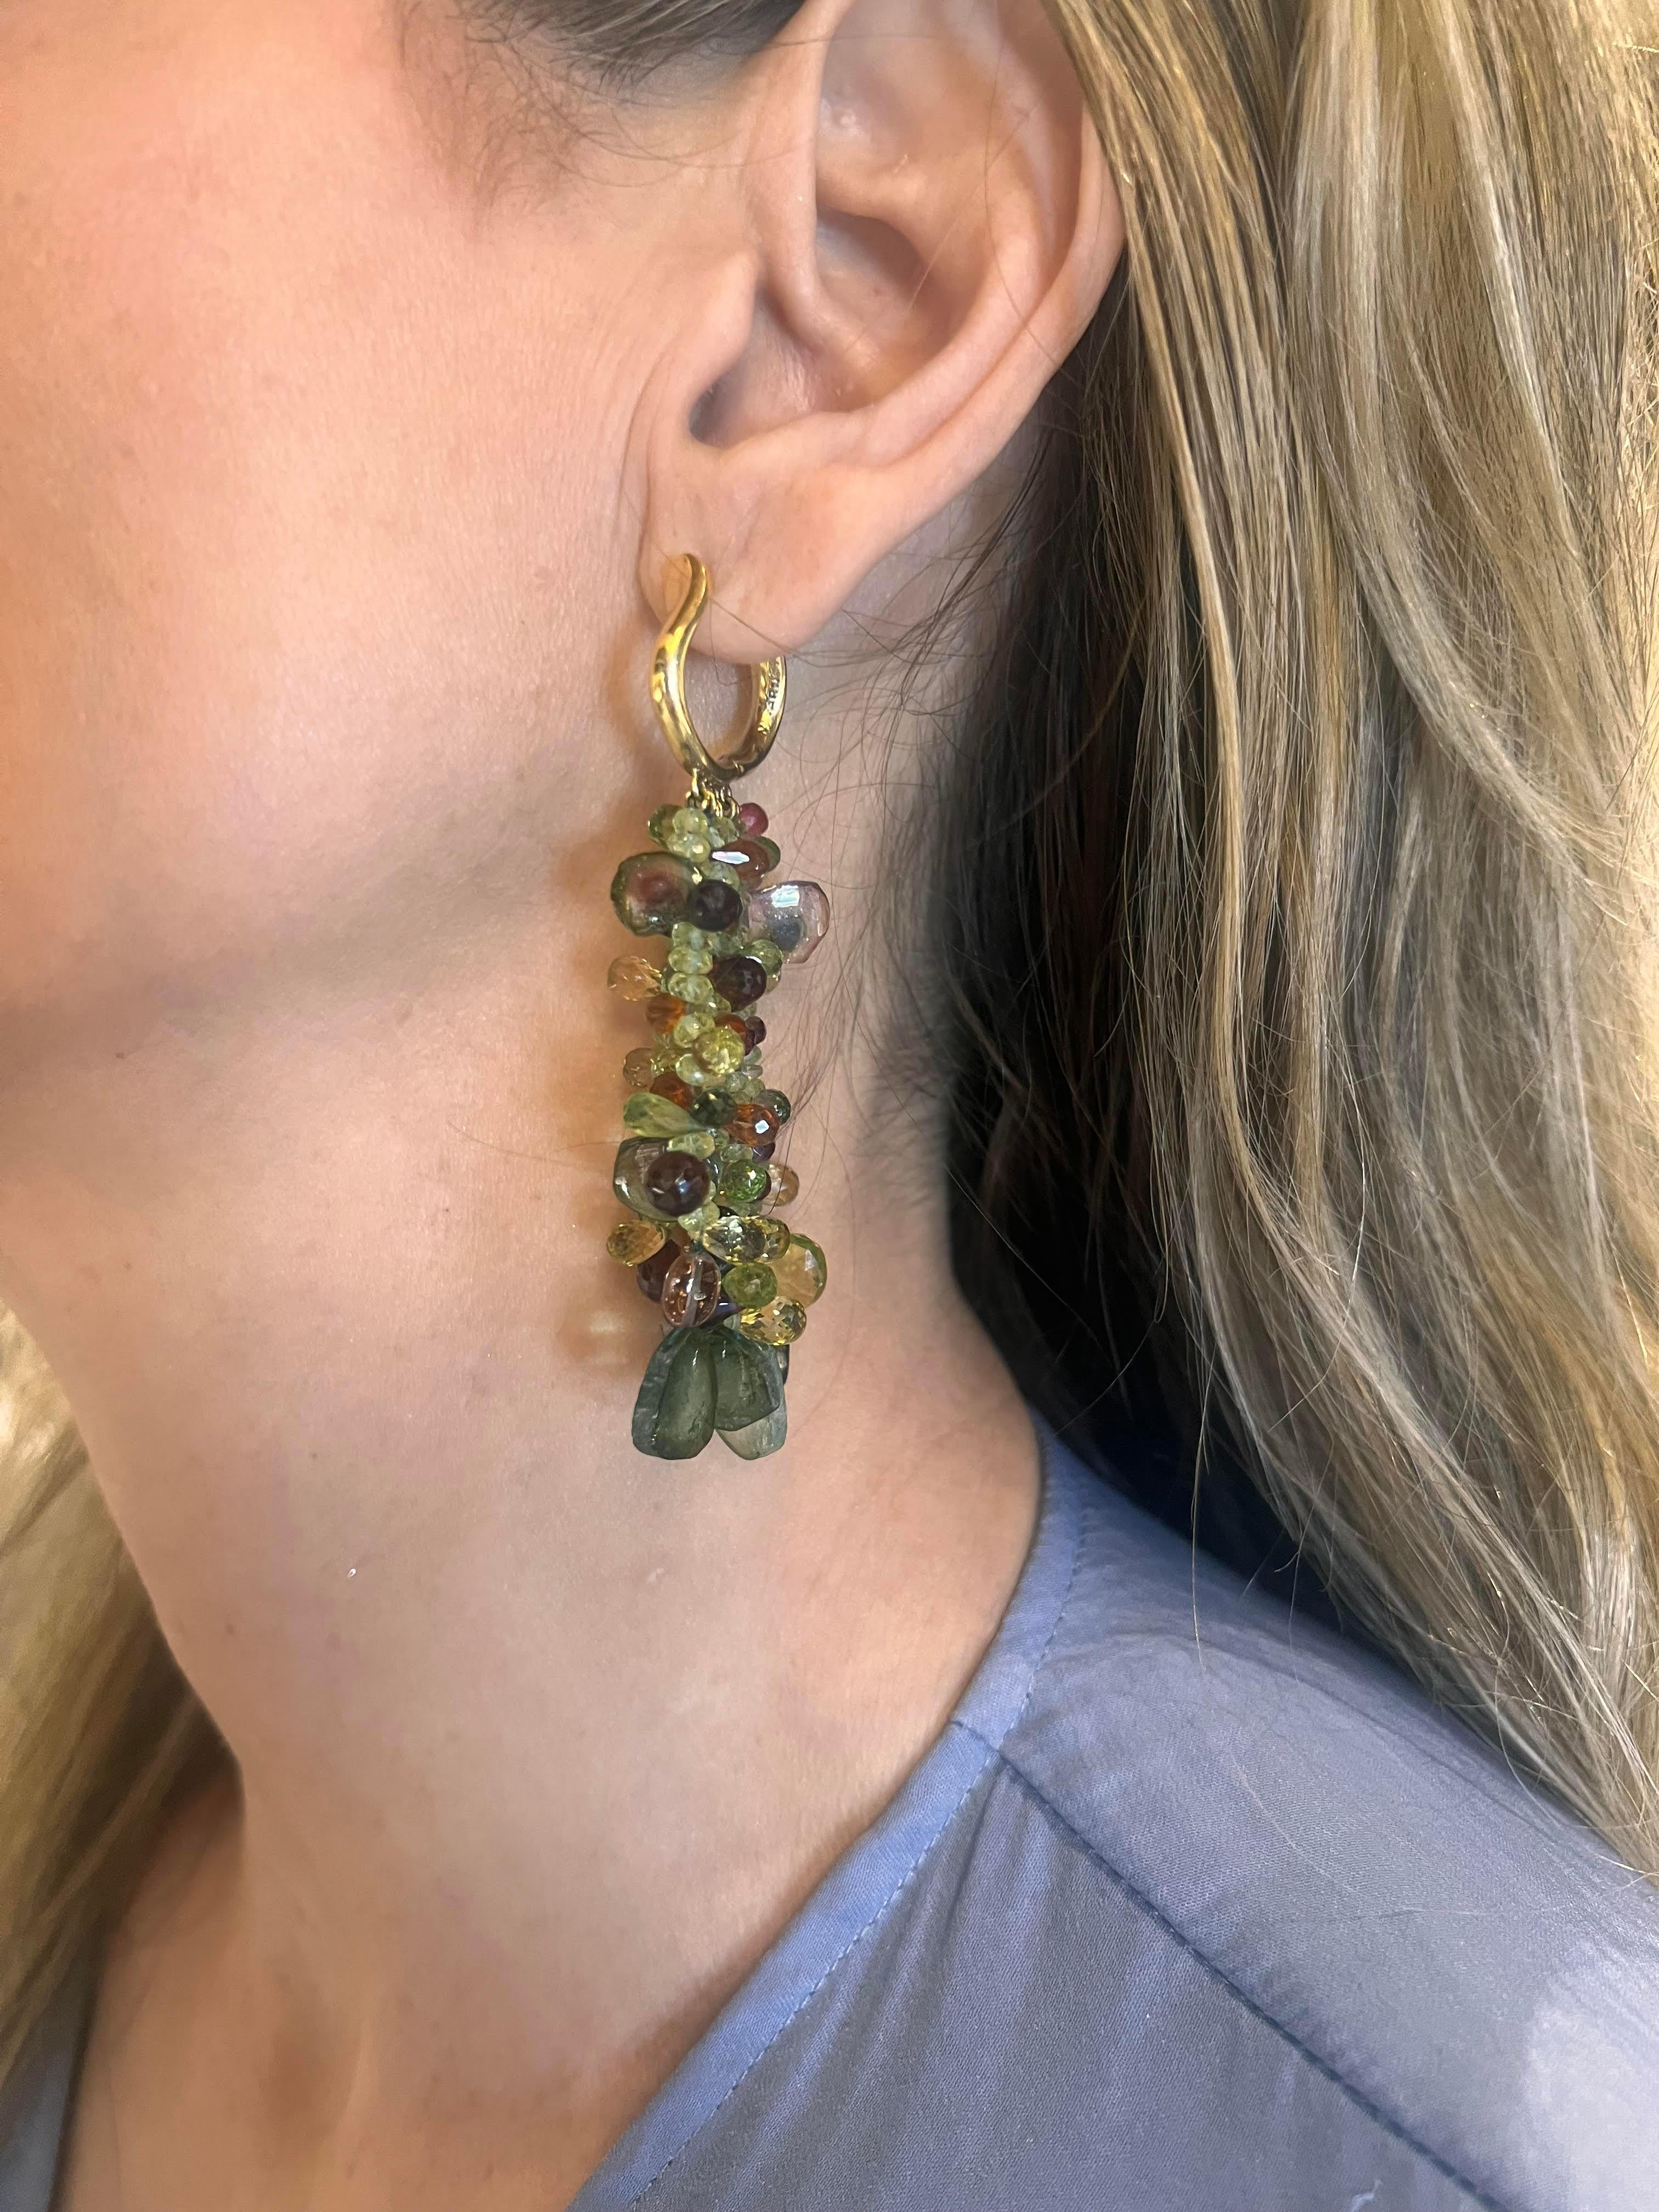 Nicholas Varney multicolored tourmaline bead drop earrings.  18k yellow gold polished 'U'-shaped hoops at top, each suspending five strands of various-shaped and colored tourmaline beads in green, red, pink, and pinkish-orange hues, some of them cut